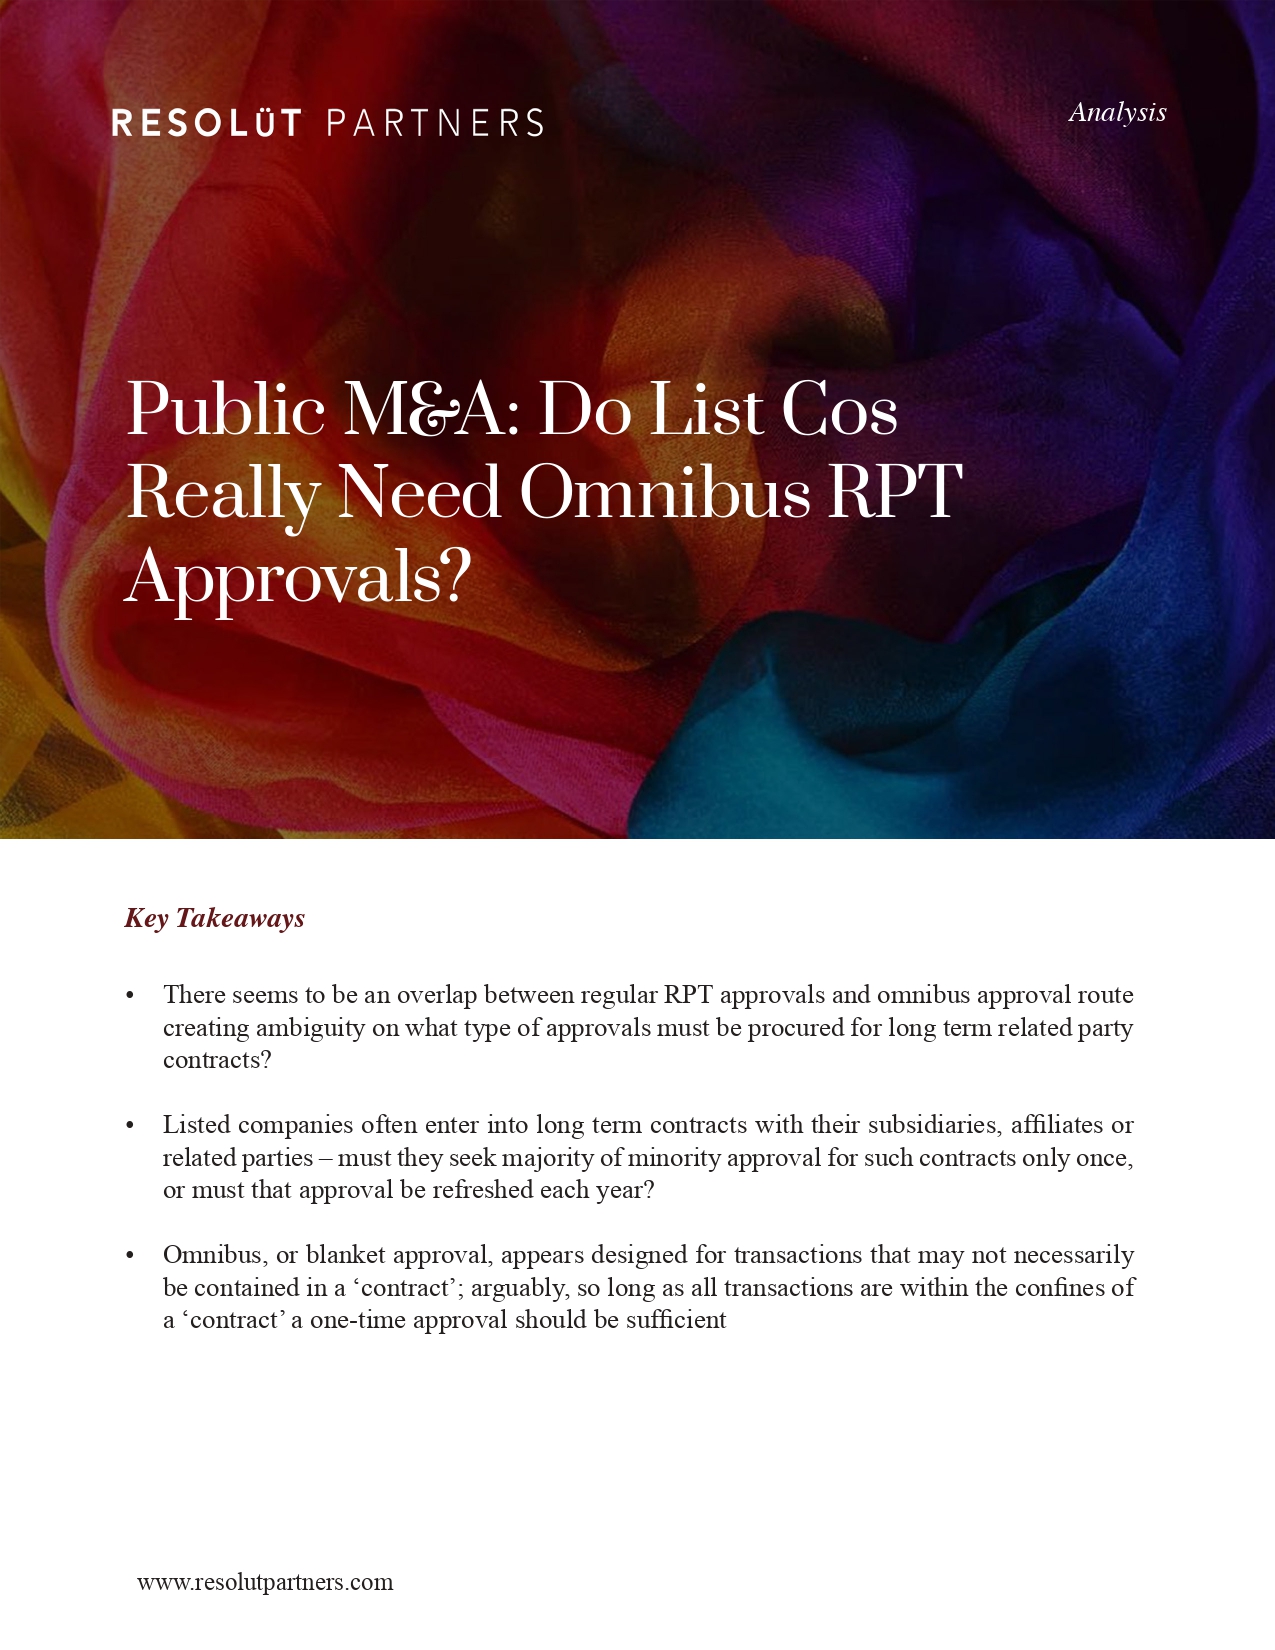 Public MA- Do List Cos Really Need Omnibus Approvals__page-0001